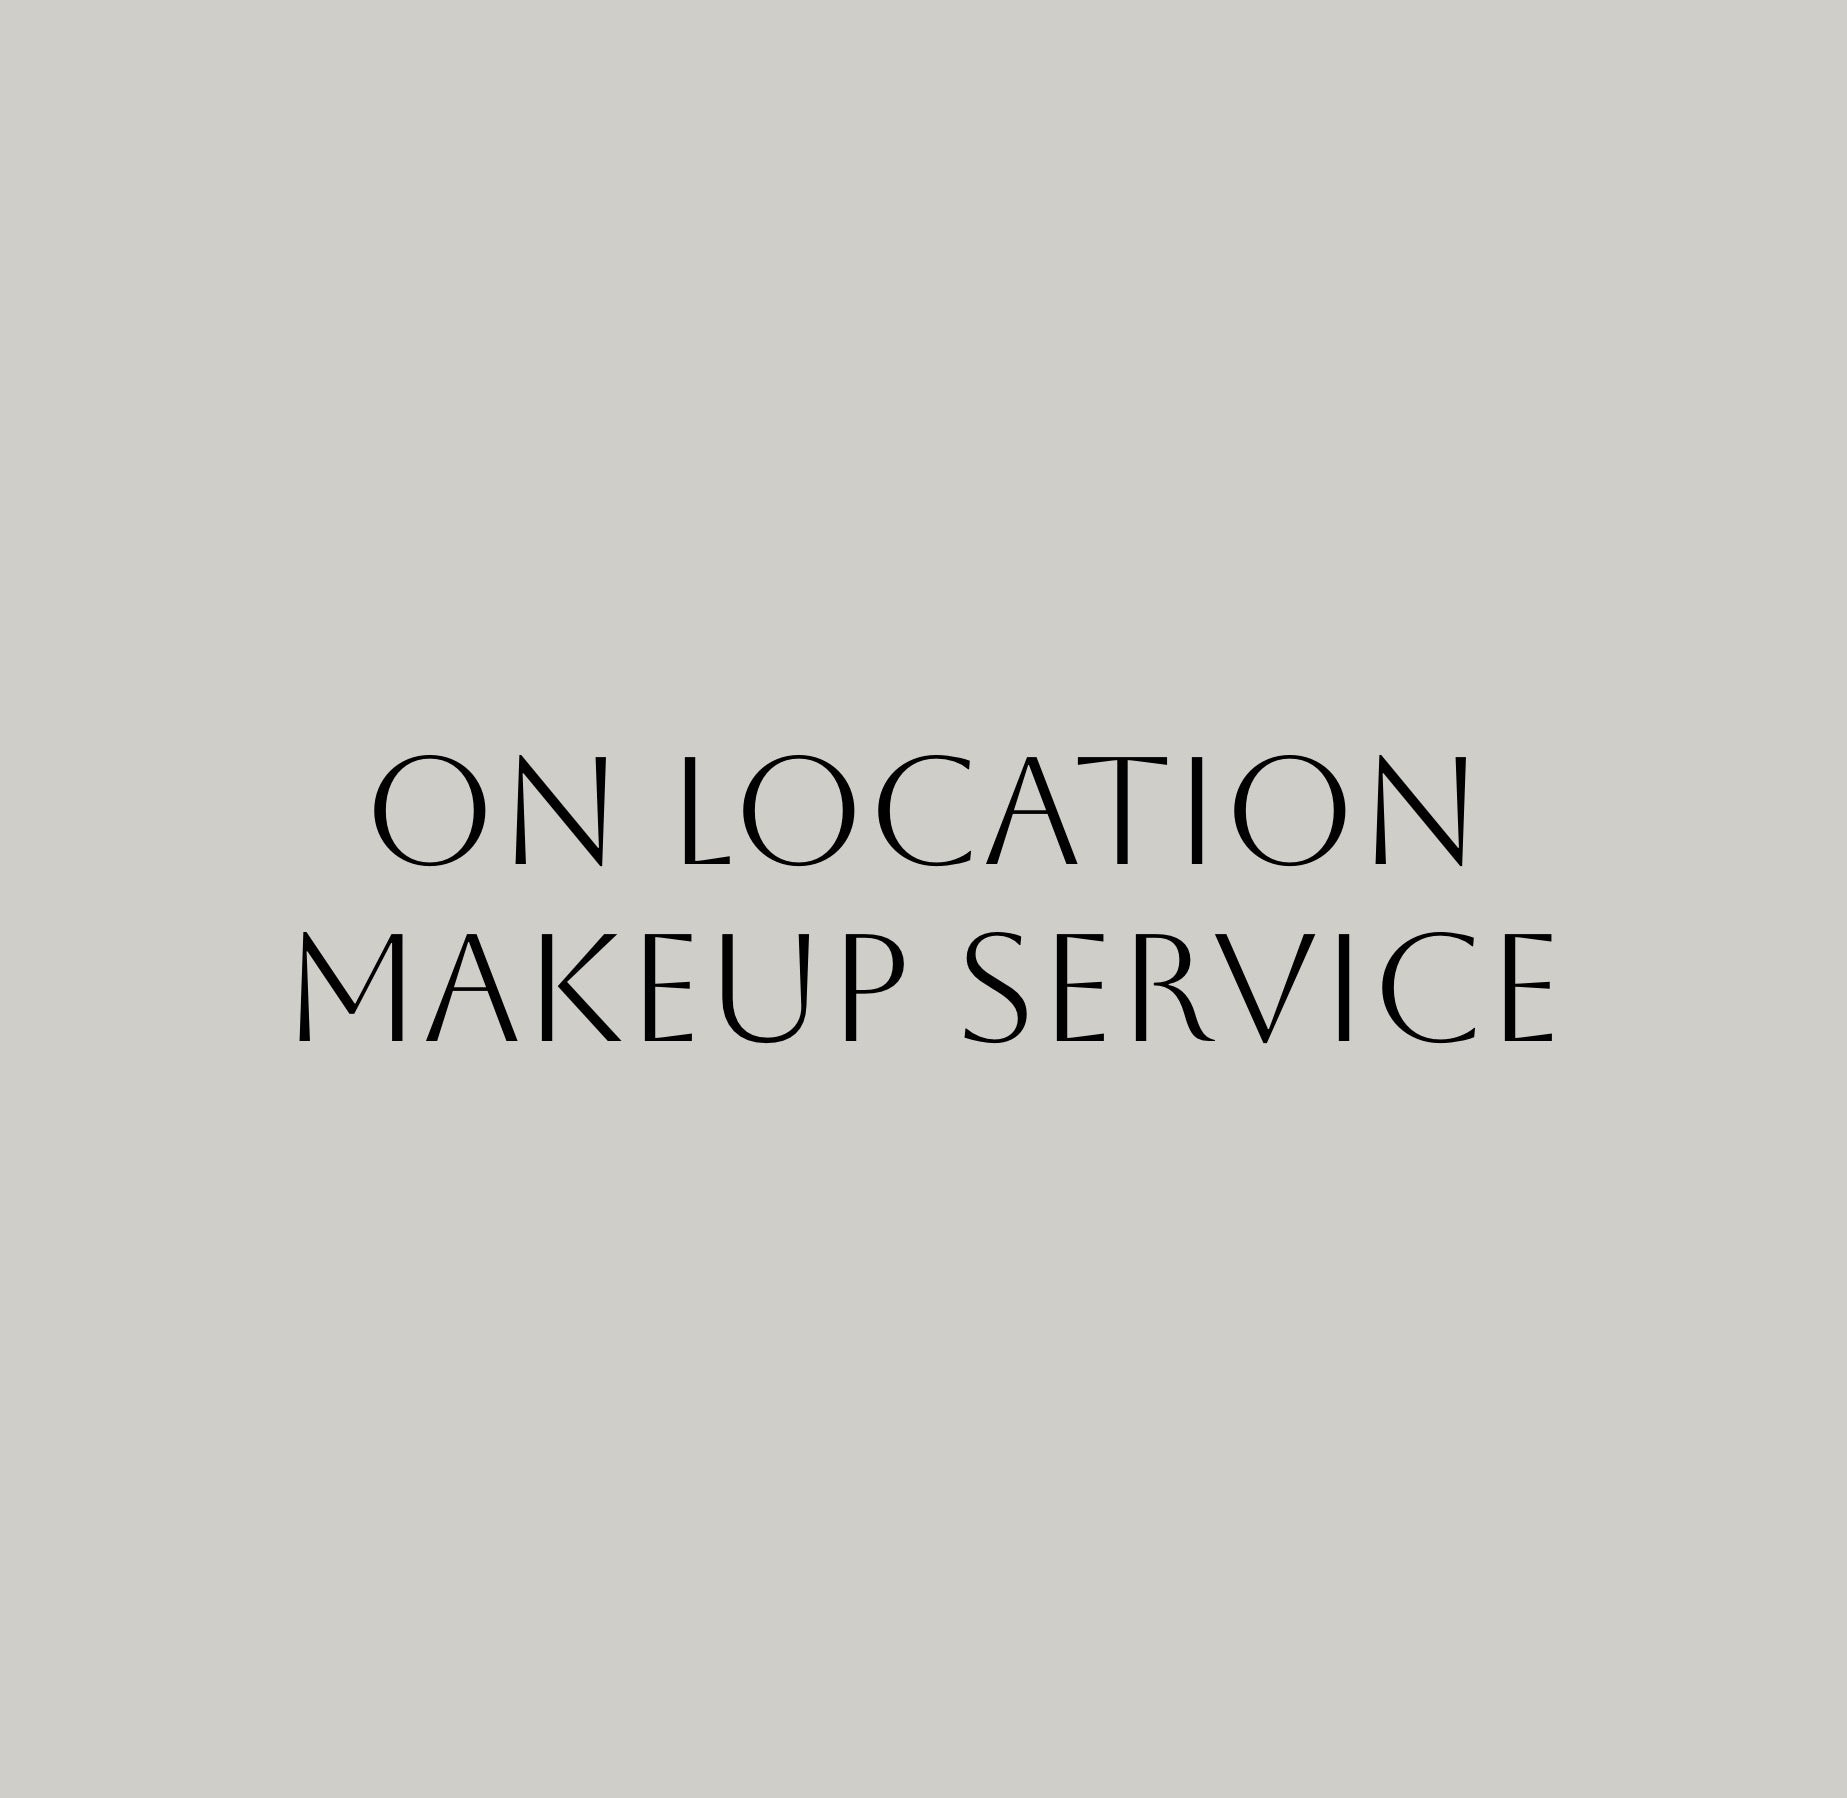 Makeup Service (On Location) - The Makeup Room